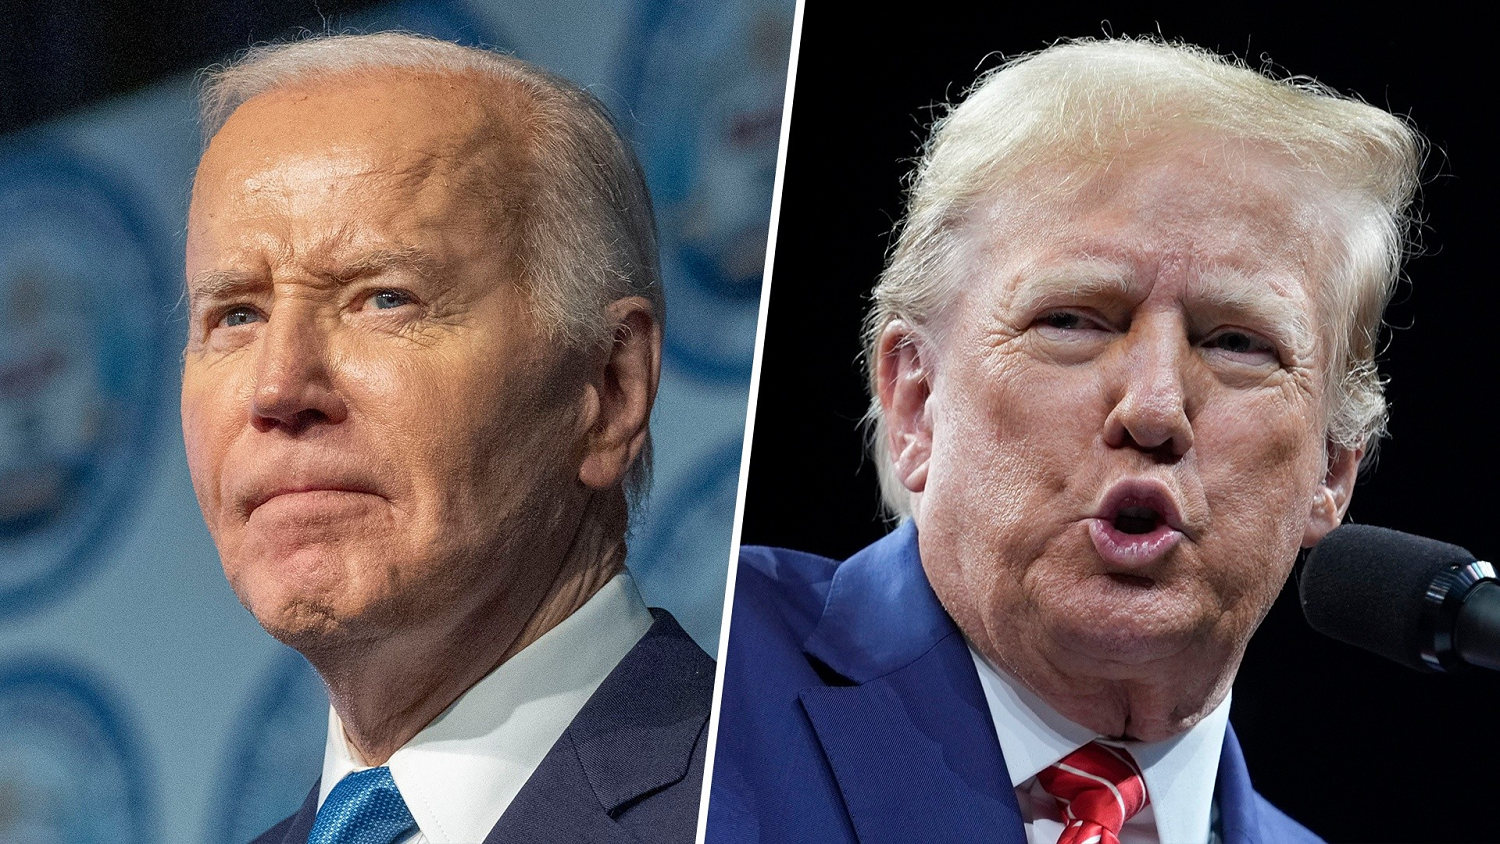 Biden and Trump trade jabs on trail on the campaign trail